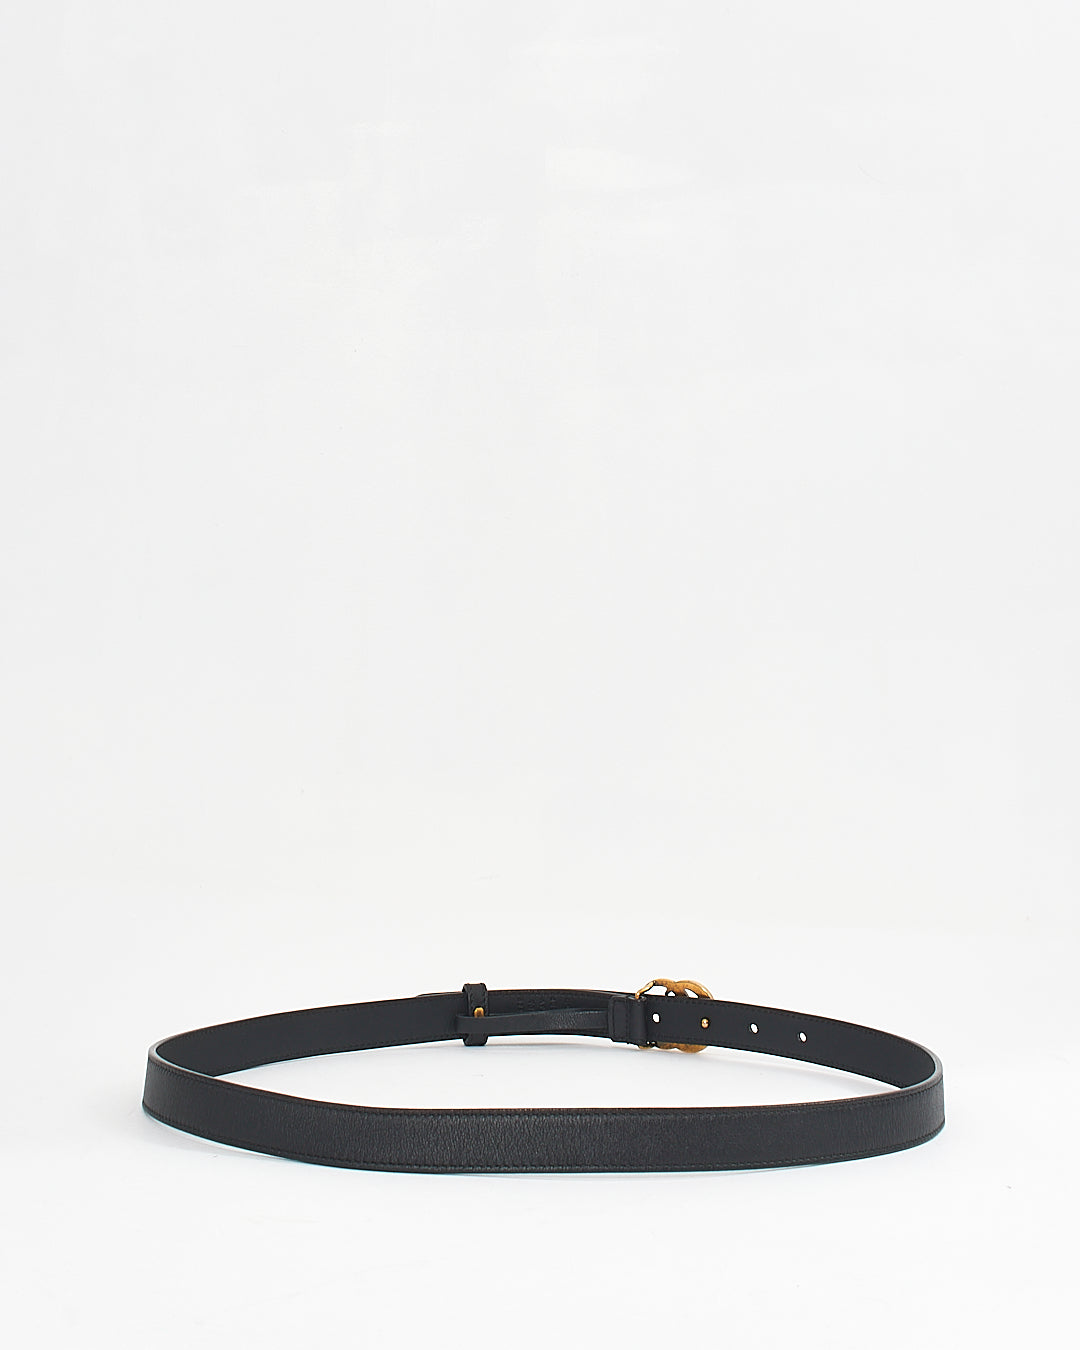 Gucci Black Leather GG Marmont Thin Belt - 90/36